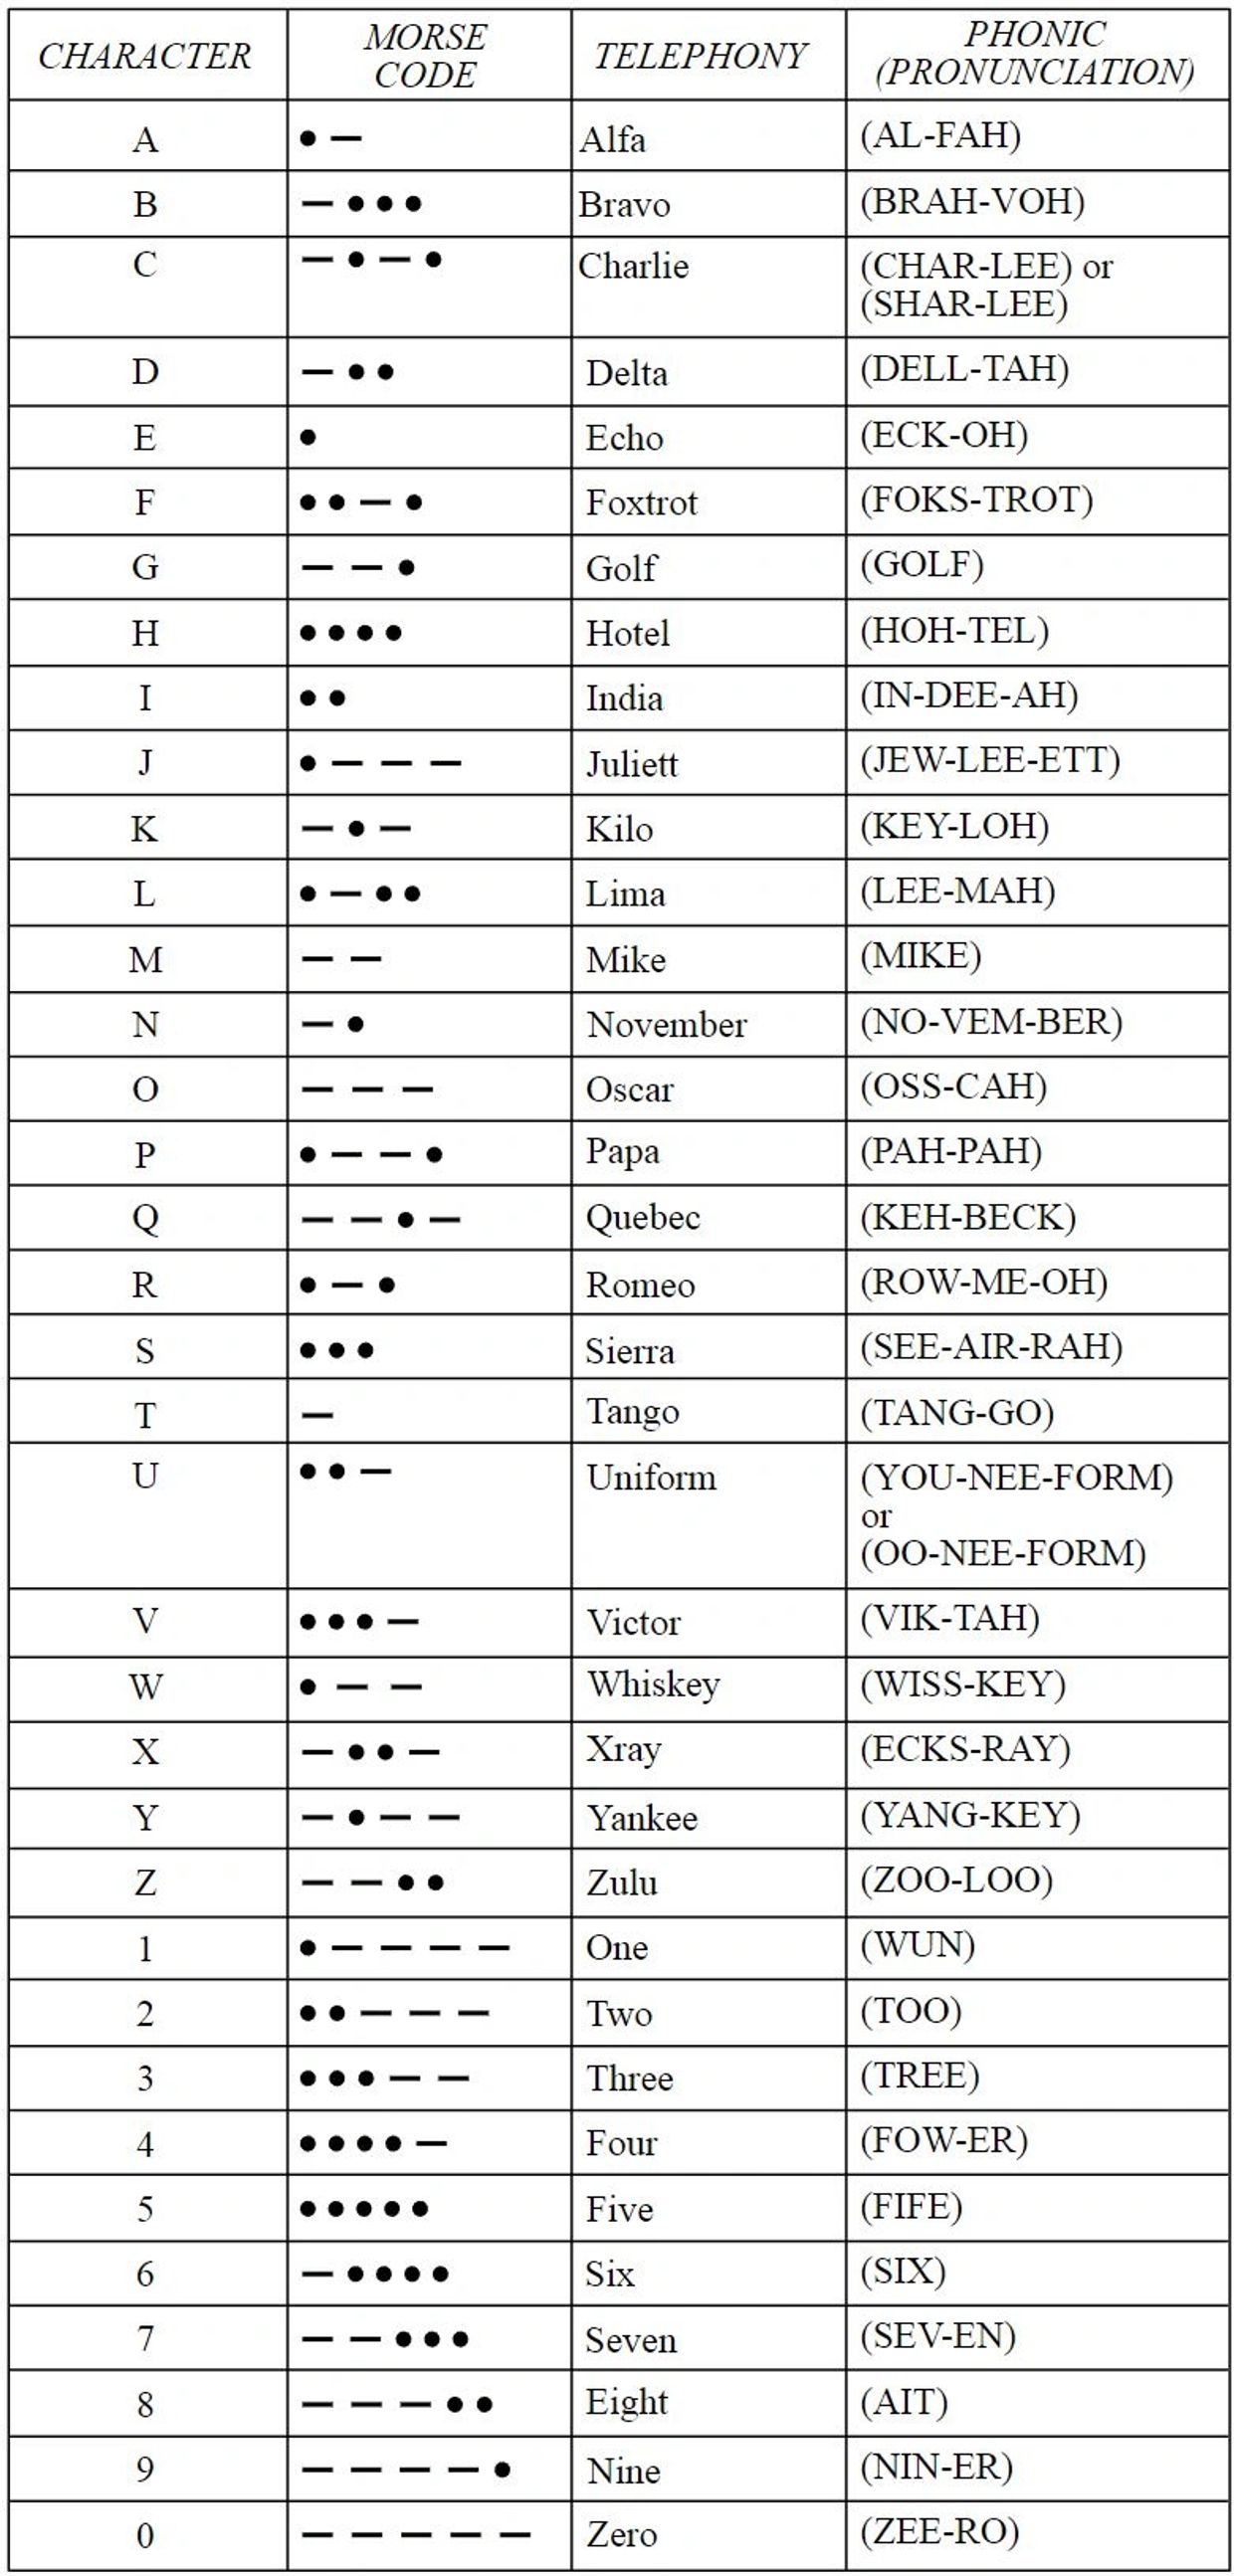 The phonetic alphabet and Morse Code